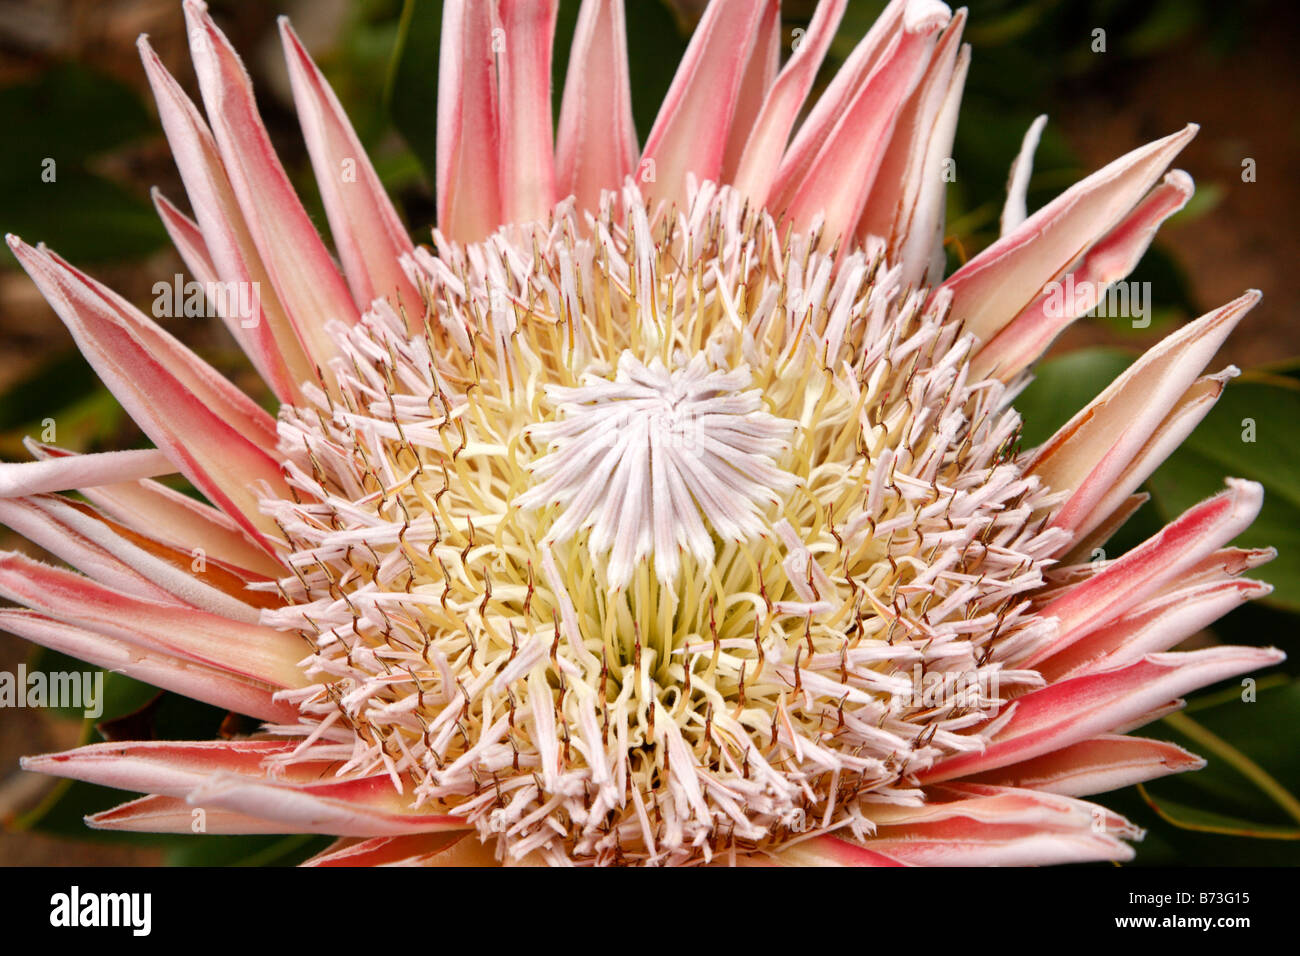 king protea protea cynaroides the national flower of south africa kirstenbosch national botanical garden cape town south africa Stock Photo